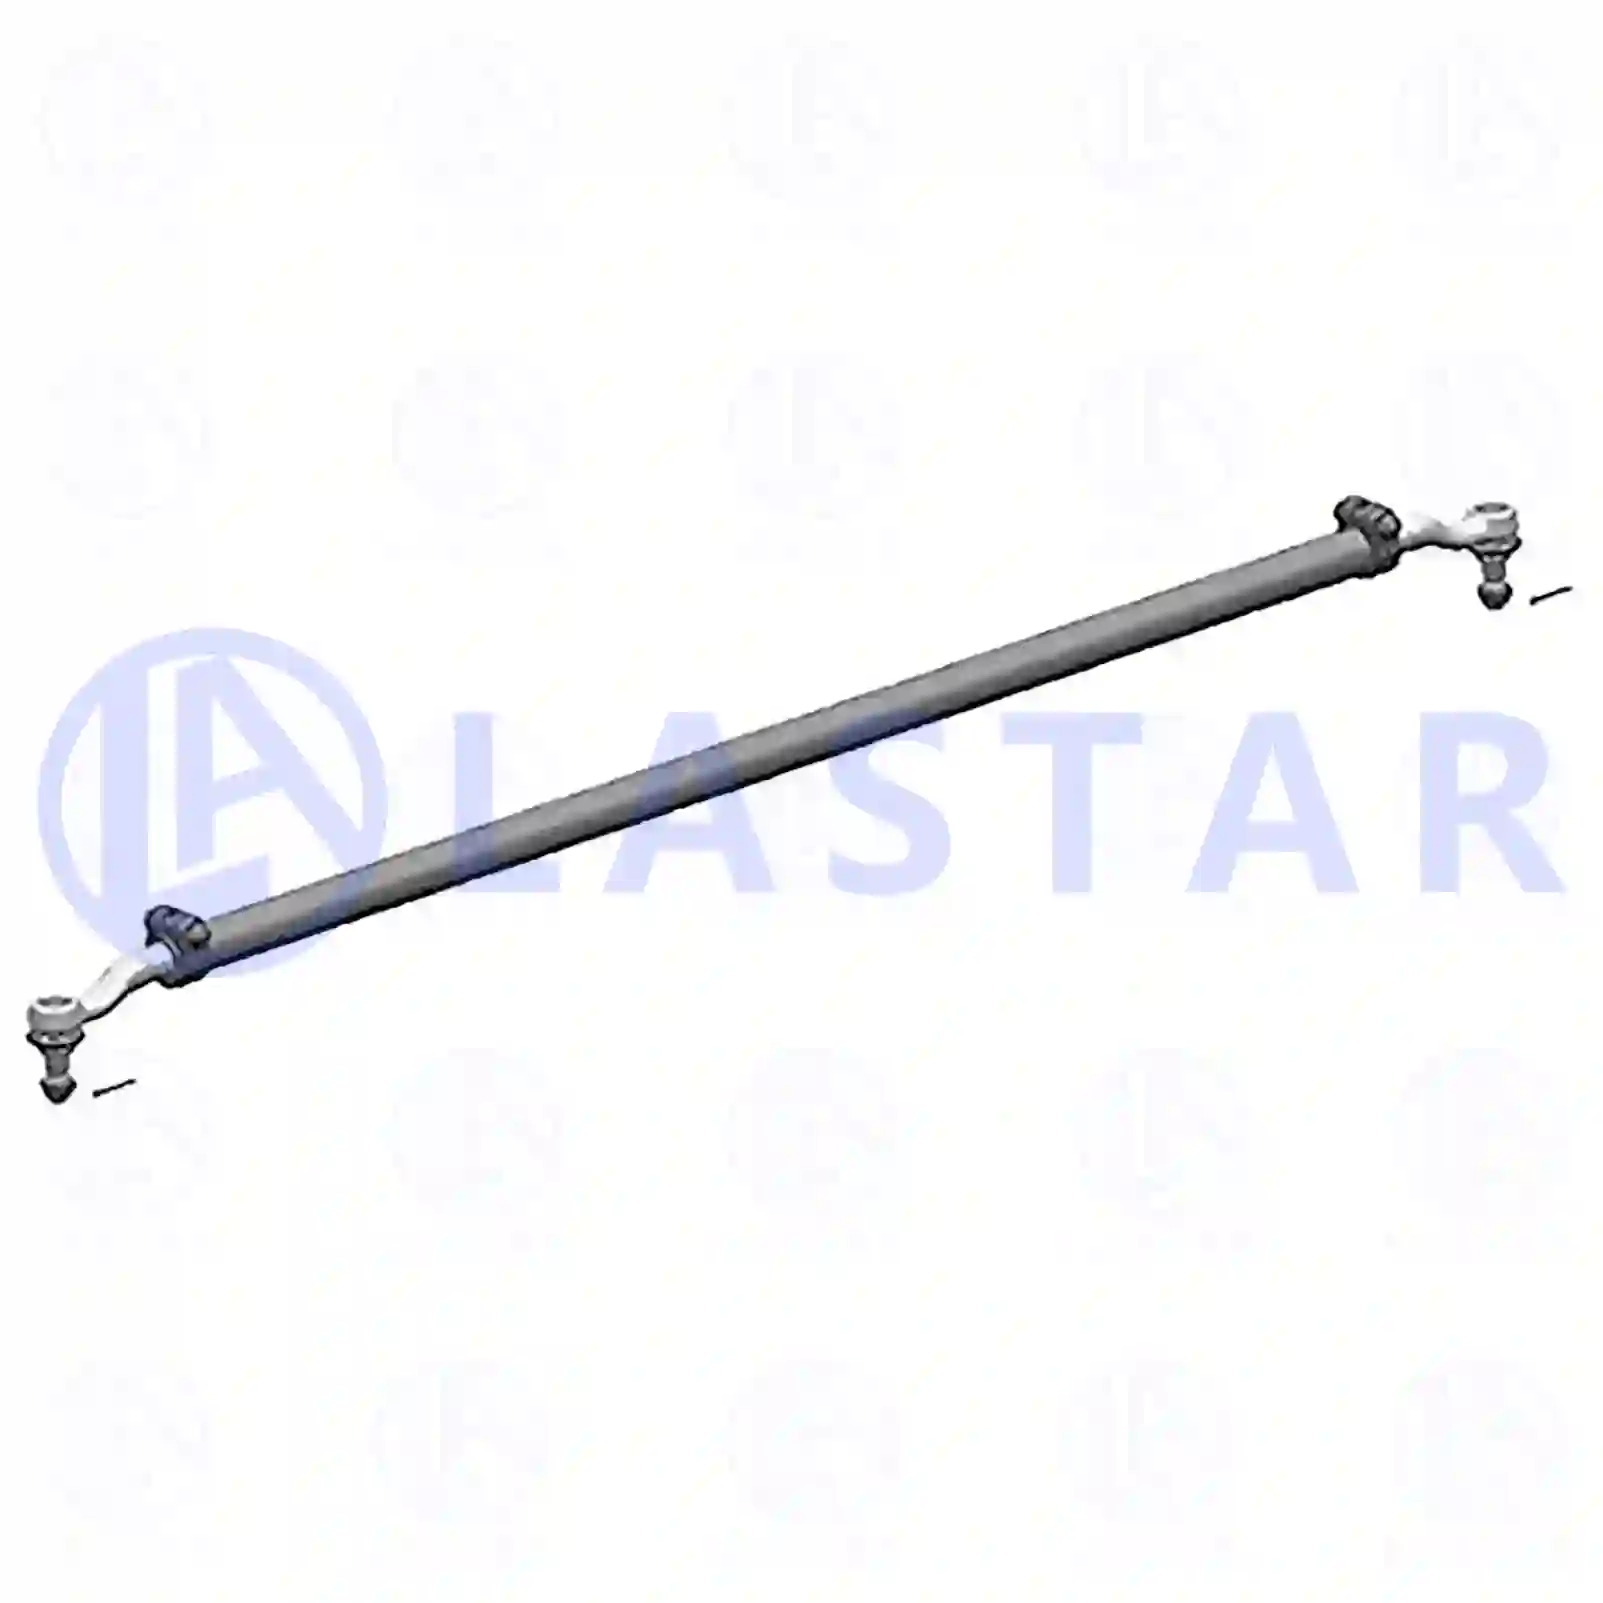 Track rod, 77730387, 81467116913, , ||  77730387 Lastar Spare Part | Truck Spare Parts, Auotomotive Spare Parts Track rod, 77730387, 81467116913, , ||  77730387 Lastar Spare Part | Truck Spare Parts, Auotomotive Spare Parts